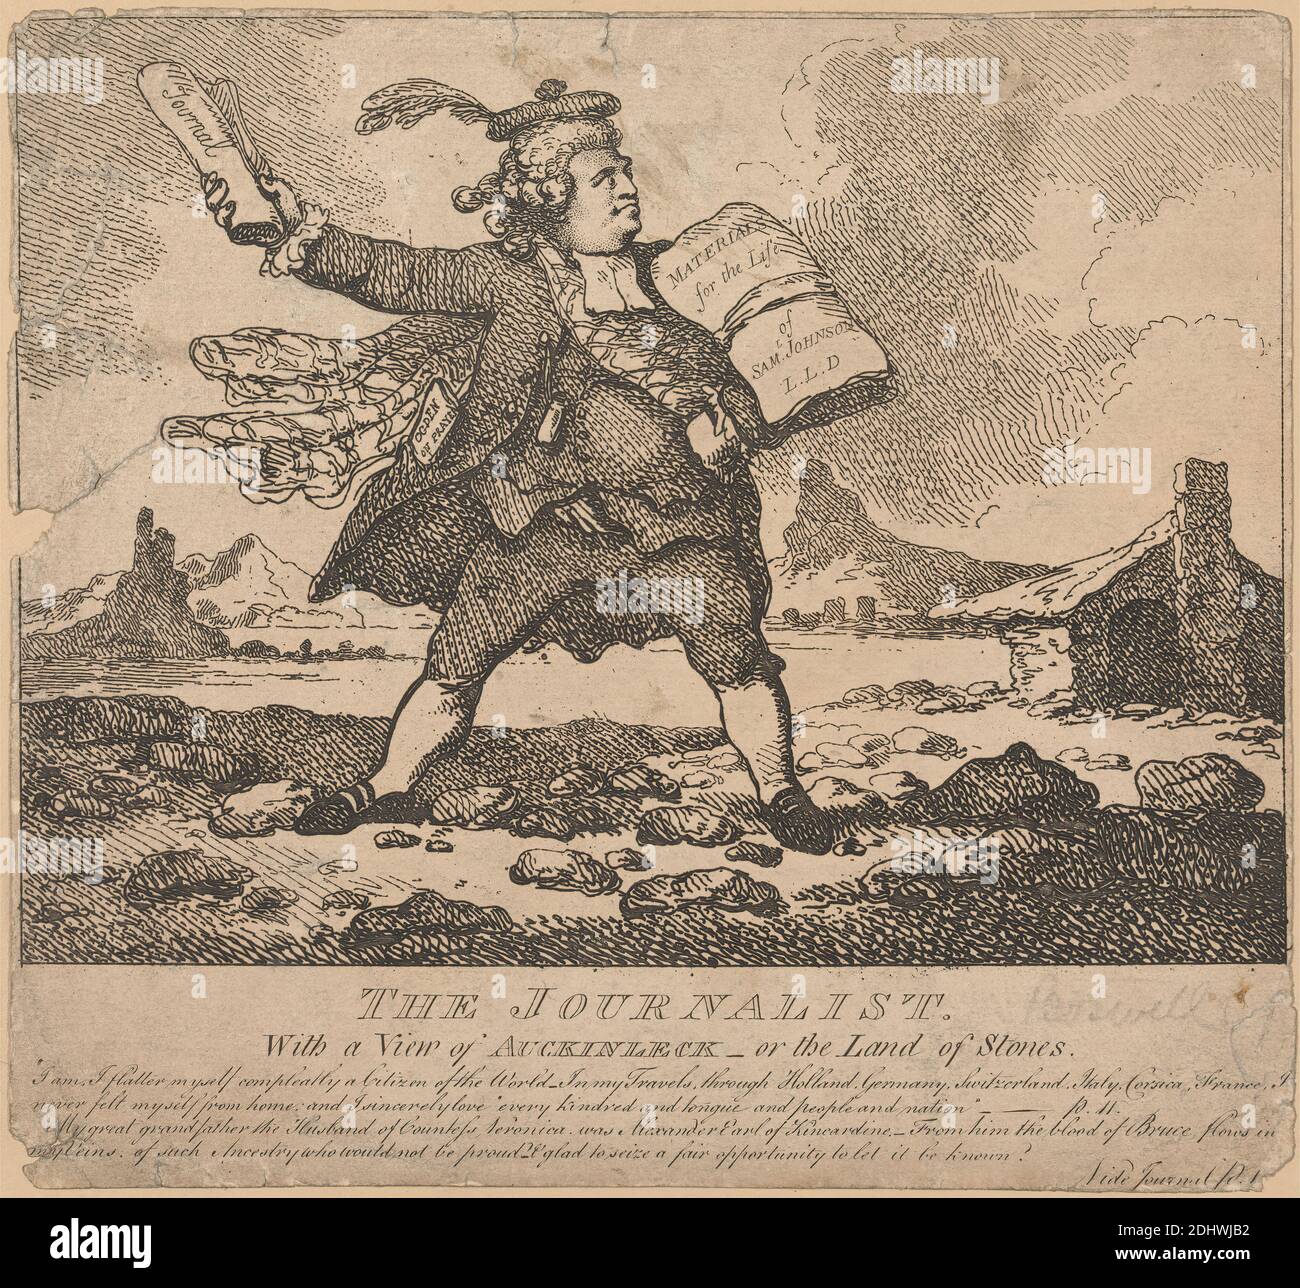 The Journalist, with a view of Auchinleck or the Land of Stones, Thomas Rowlandson, 1756–1827, British, after Samuel Collings, active 1784–1795, British, 1786, caricature, coast, journal, literary theme, rocks (landforms), Auchinleck, East Ayrshire, Scotland, United Kingdom Stock Photo